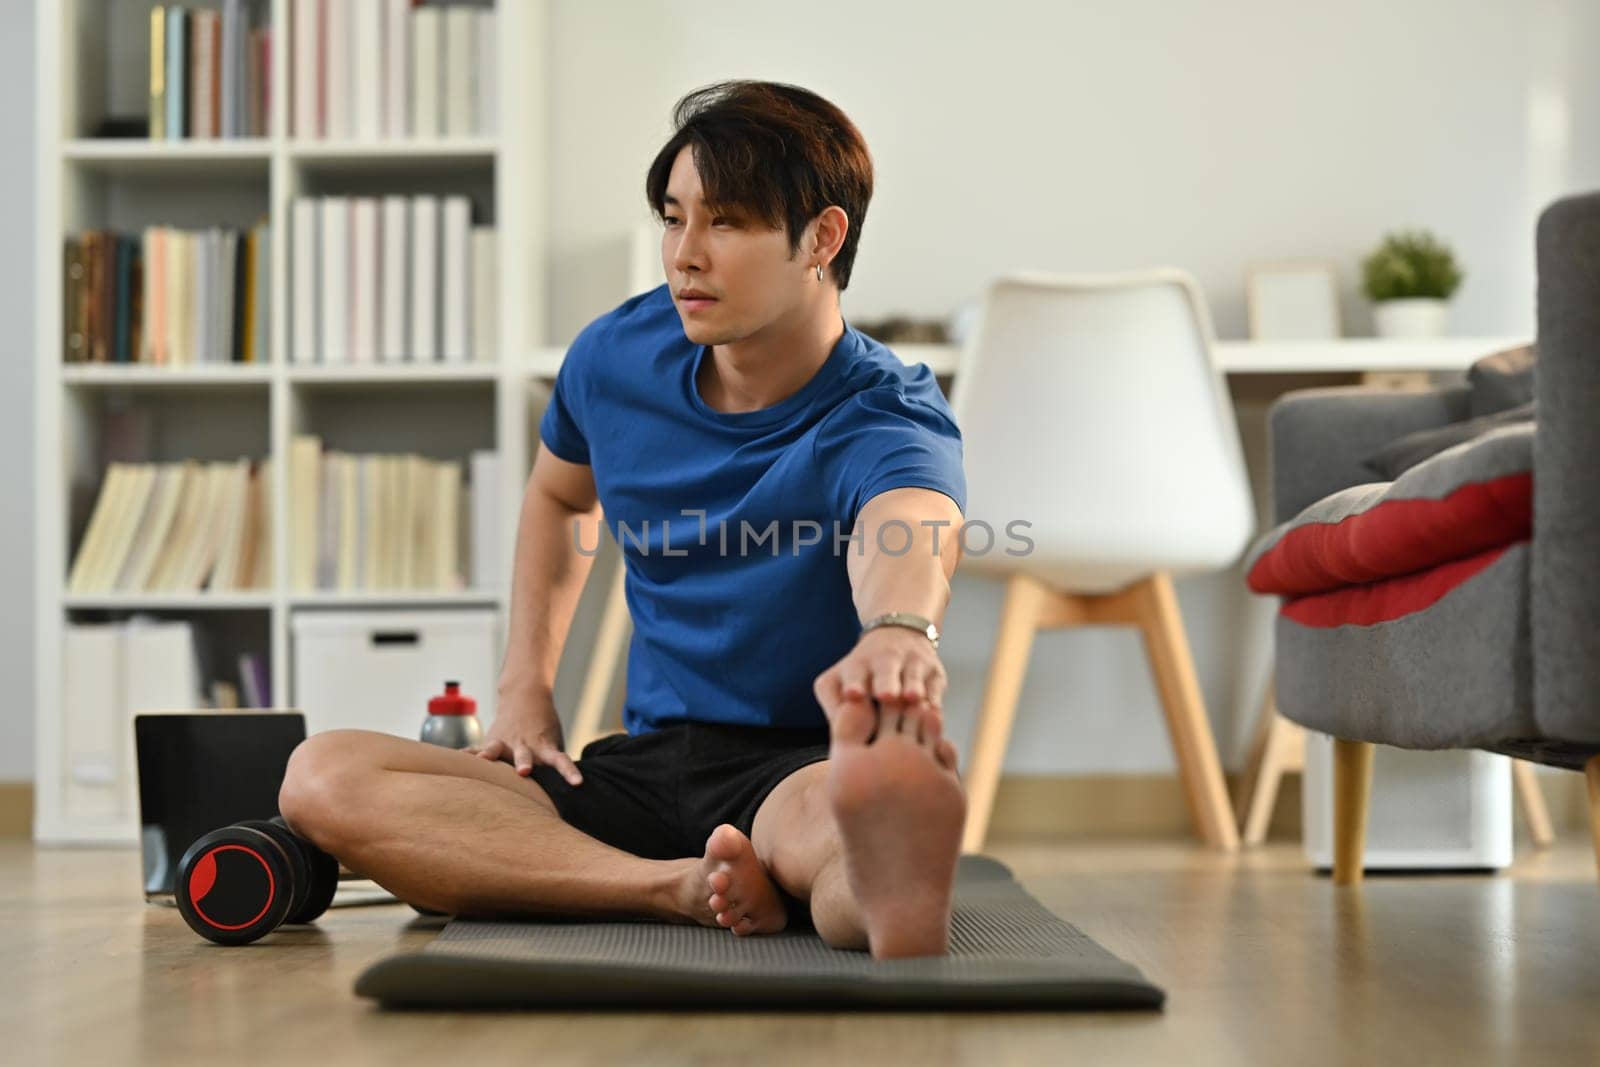 Active sportsman in fitness clothes stretching leg, preparing for morning workout at home. Healthy lifestyle concept.